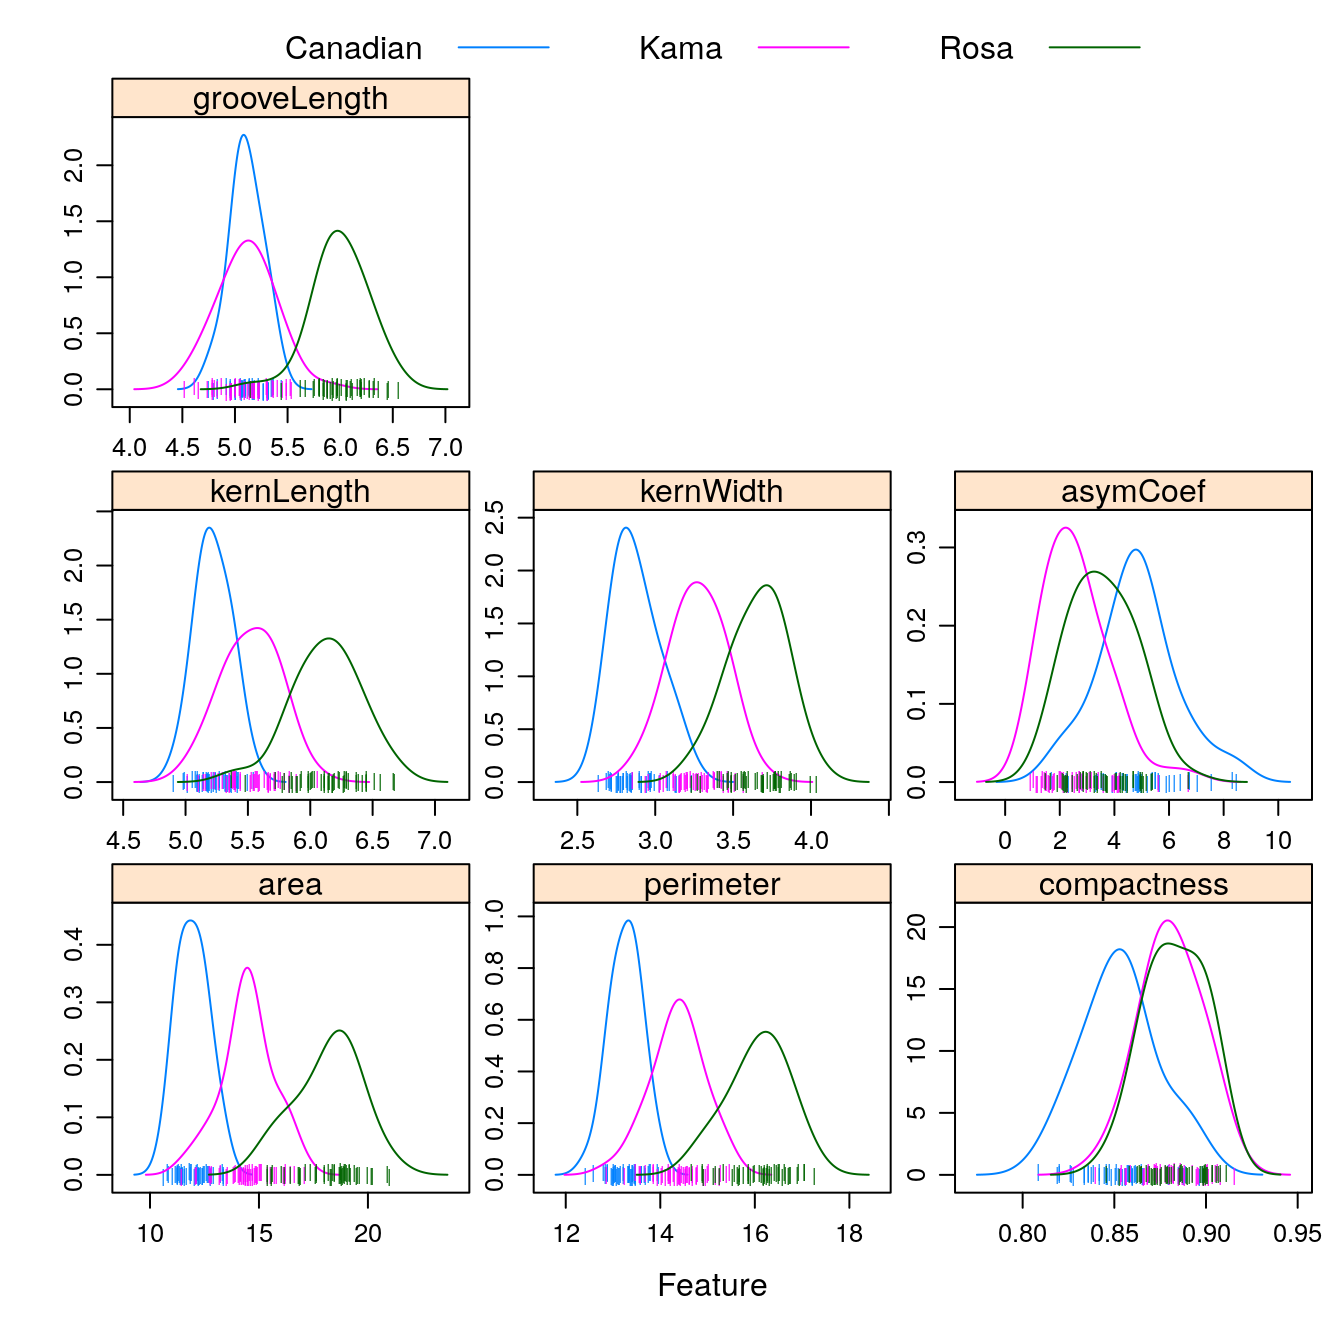 Density plots of the 7 geometric parameters in the wheat data set